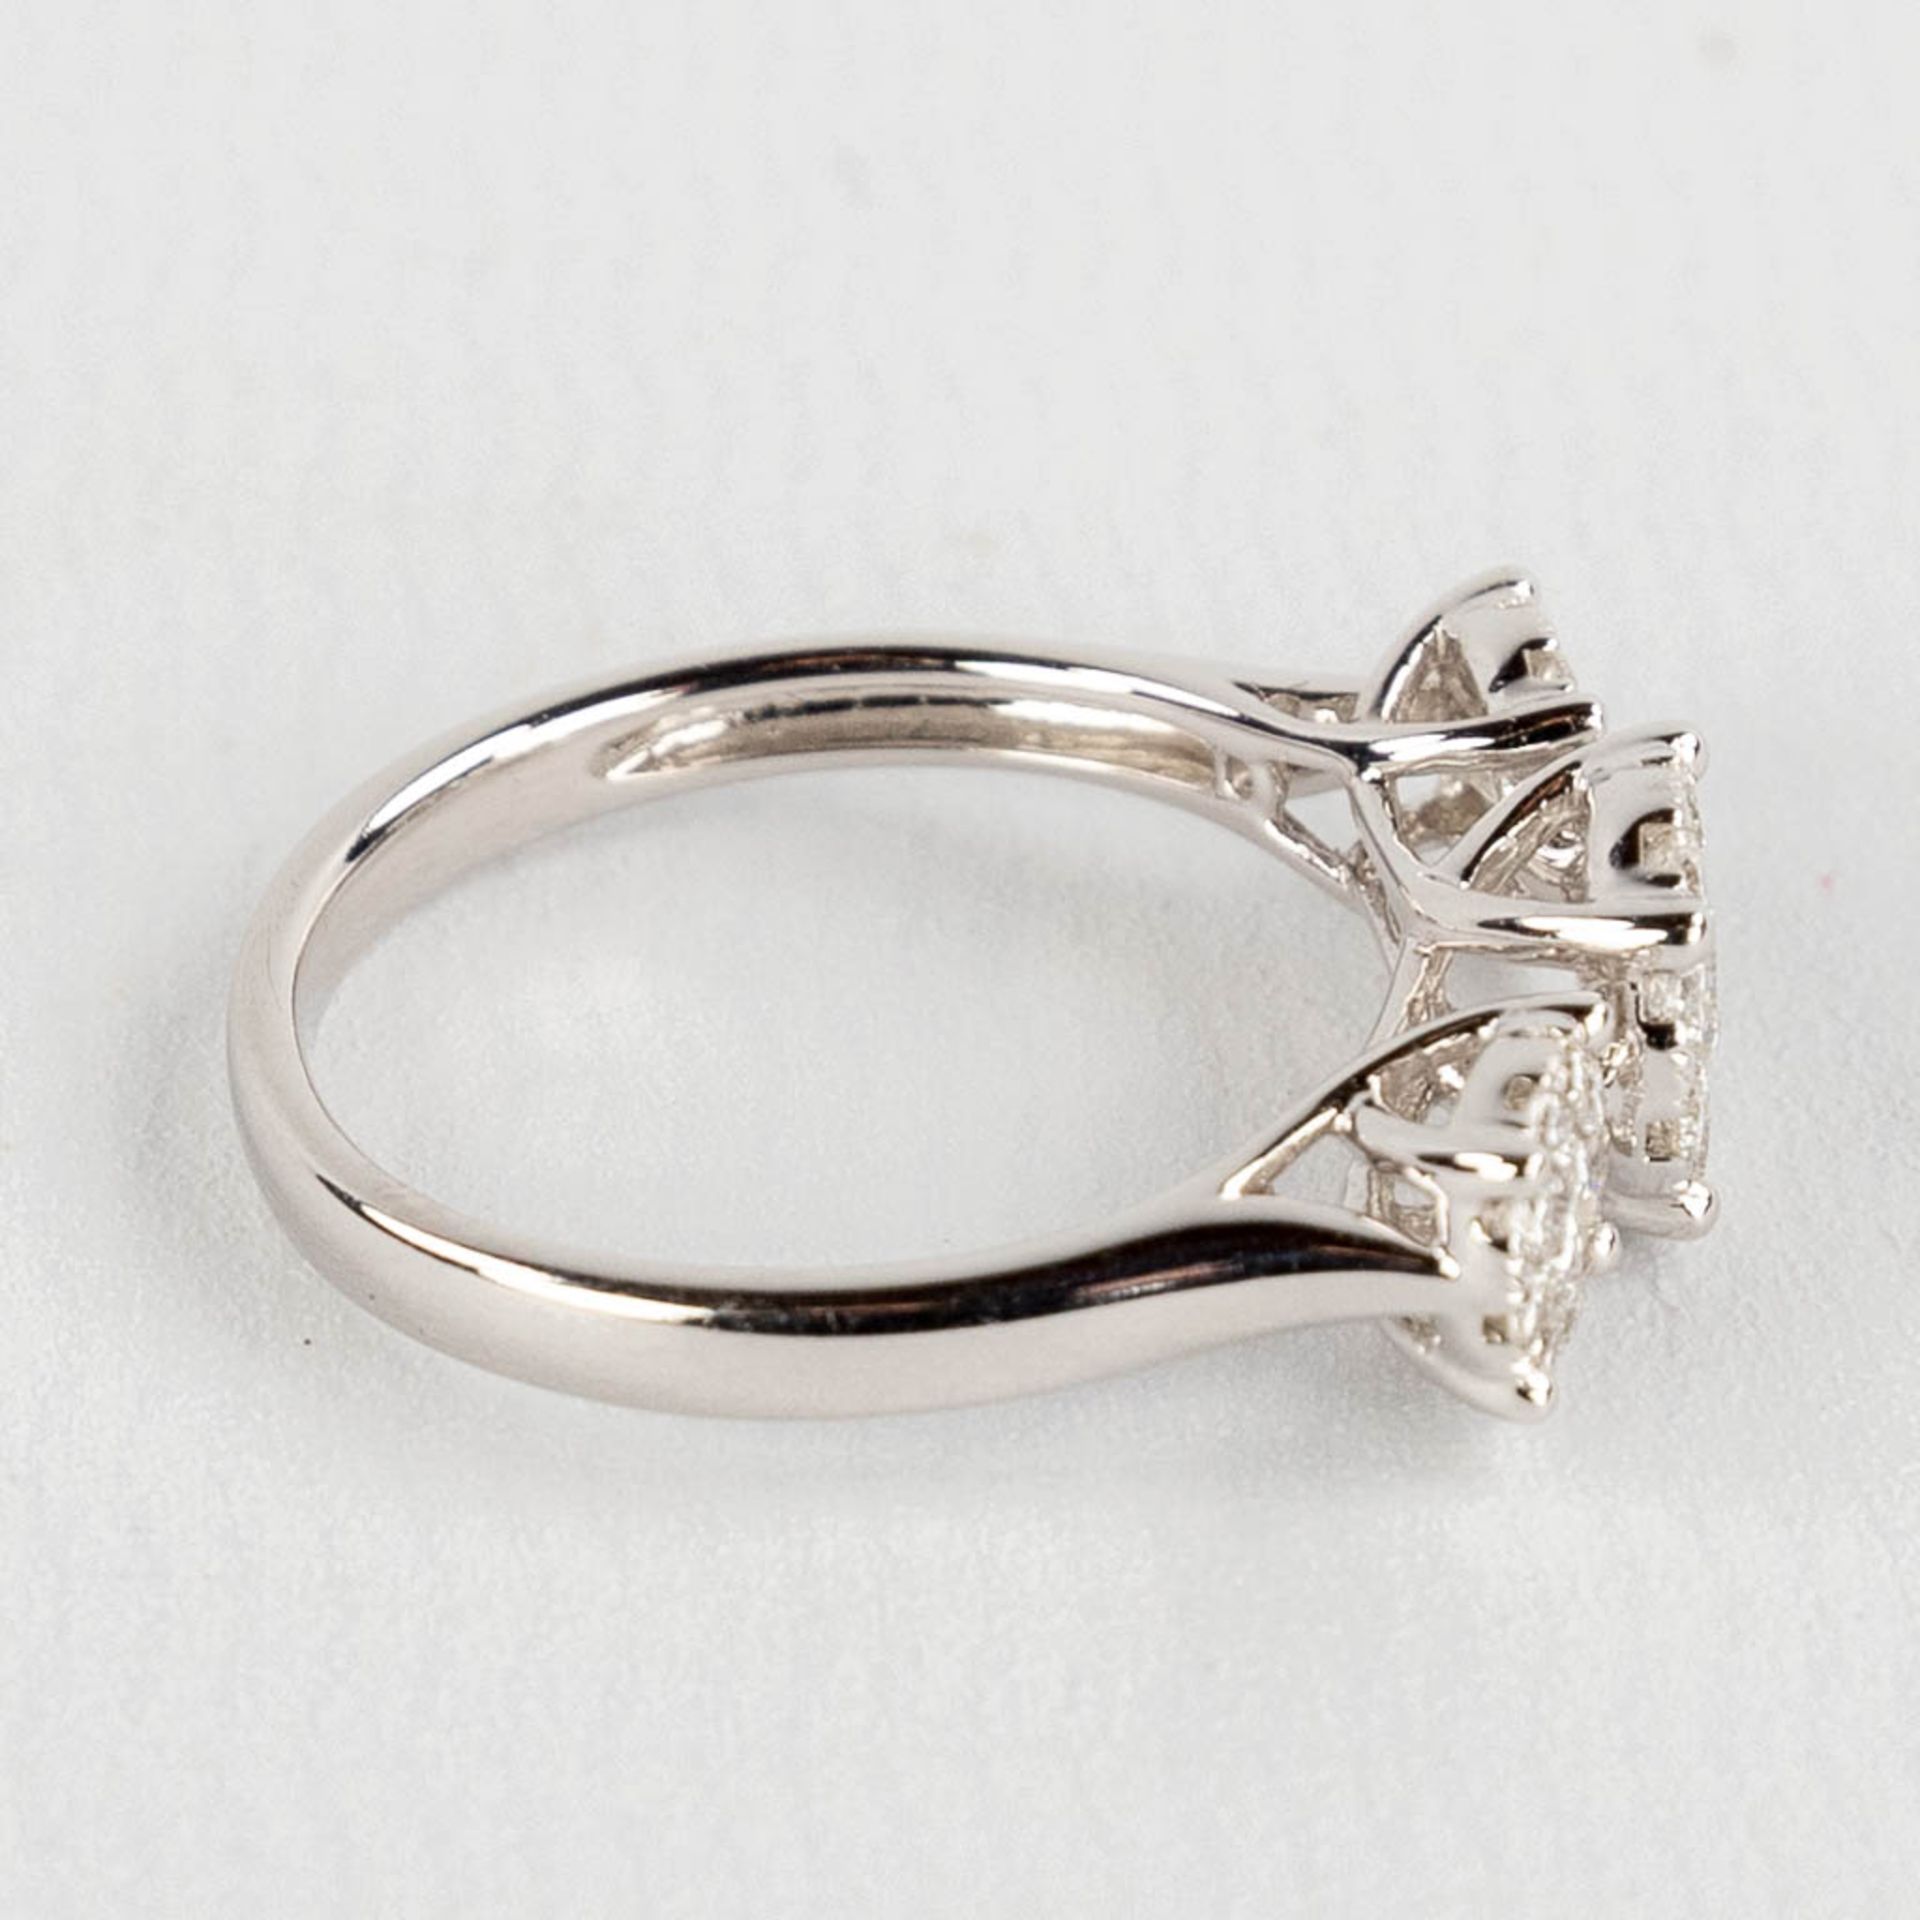 A ring, 18kt white gold with diamonds, approx. 1,02ct, ring size 54. - Image 4 of 10